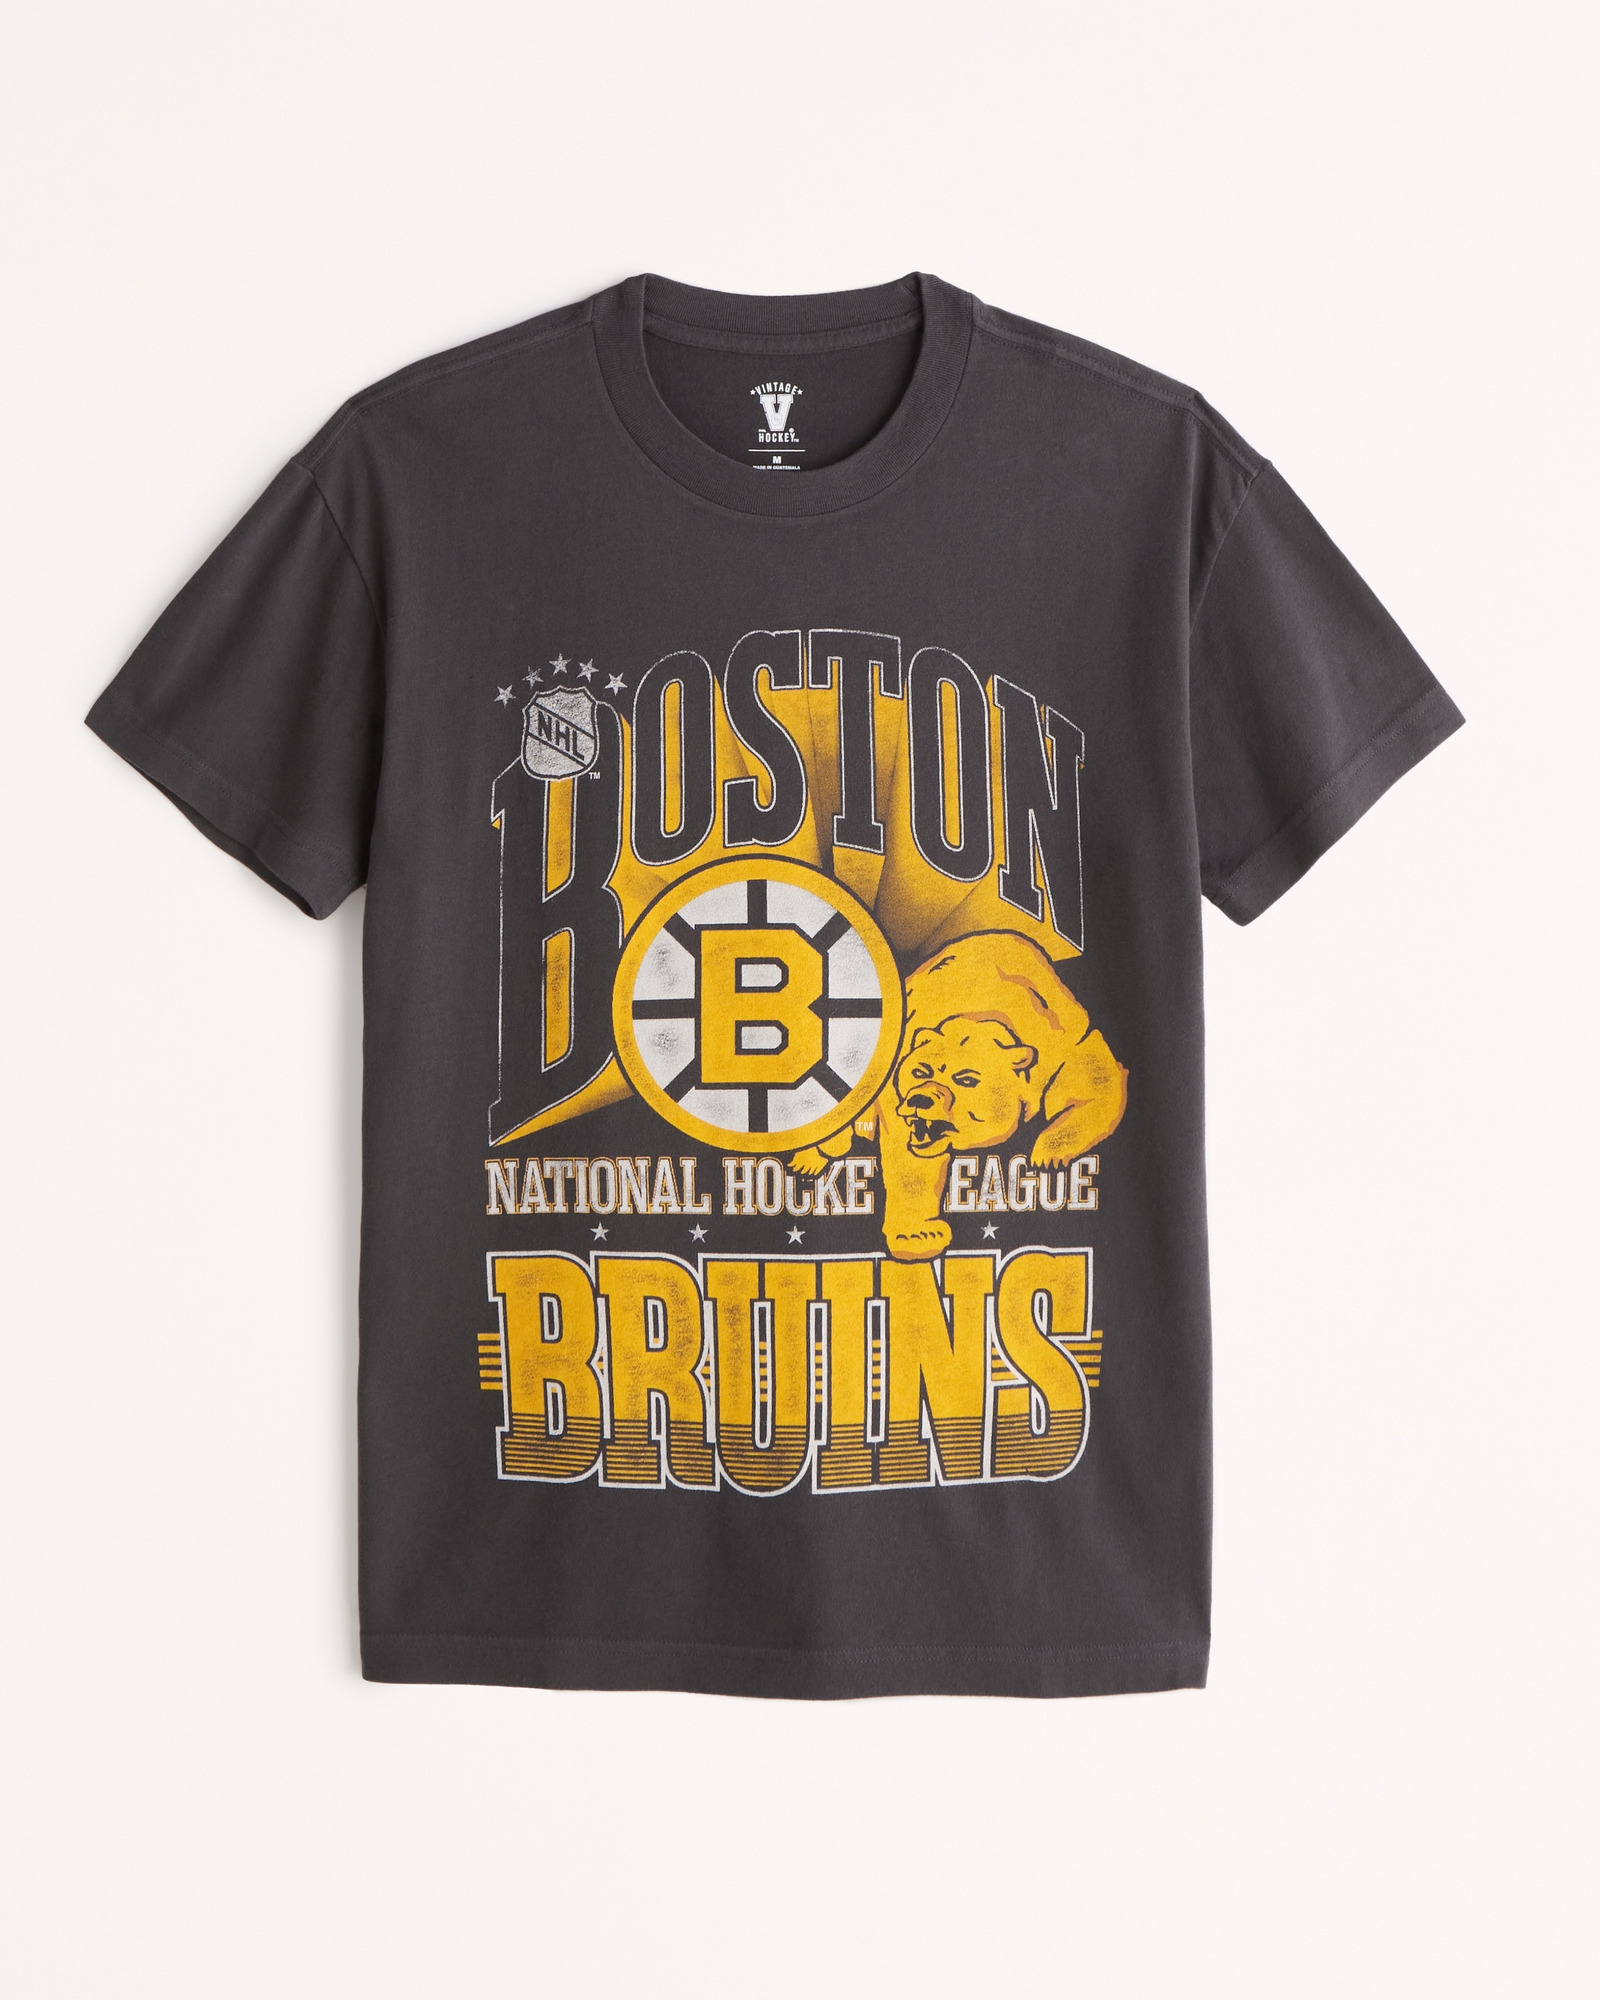 Men's Boston Bruins Graphic Tee in Dark Grey | Size M Tall | Abercrombie & Fitch